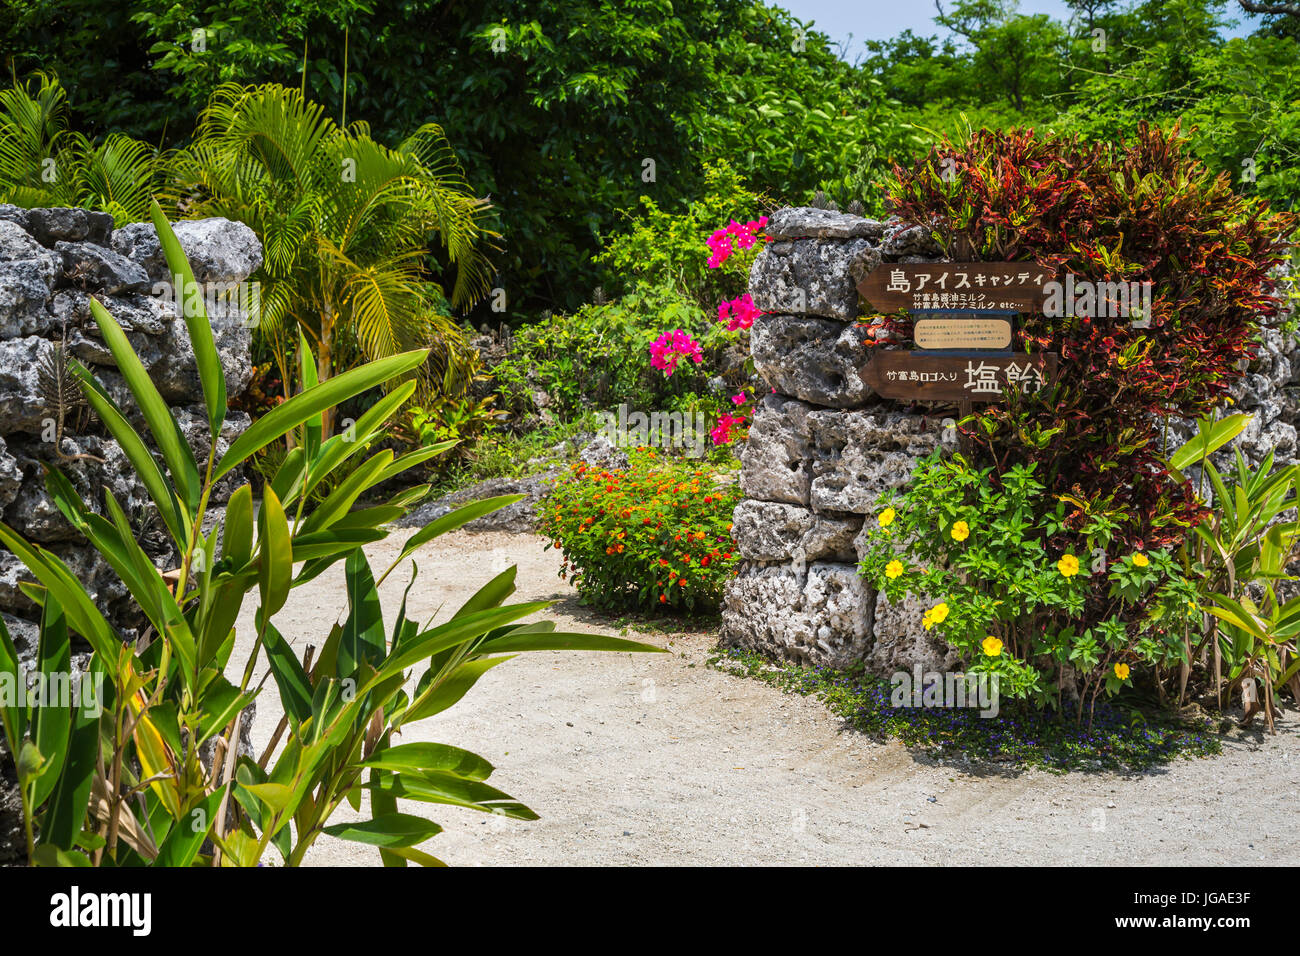 Sand street with bougainvillea flowers, and stone fencing in a village on Taketomi Island, Okinawa Prefecture, Japan. Stock Photo